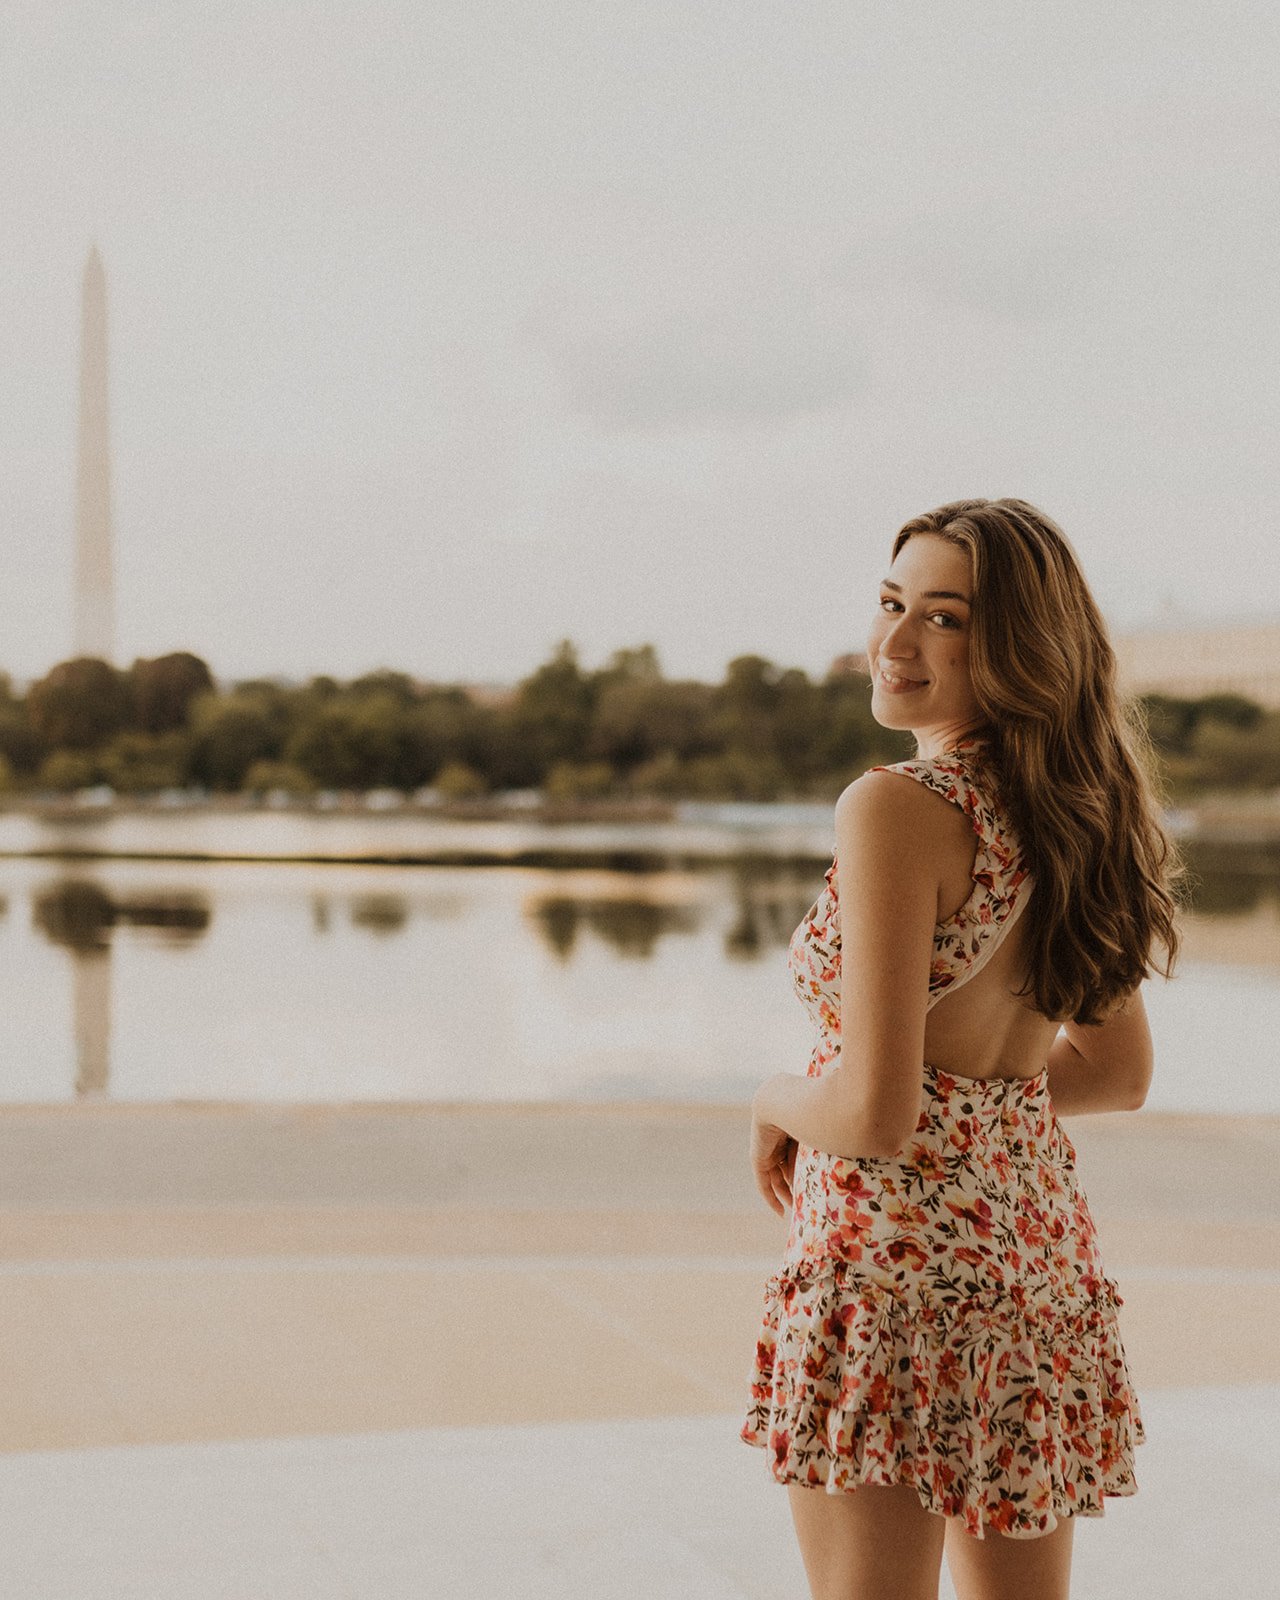 Senior Portraits at The National Mall in Washington, D.C.-41